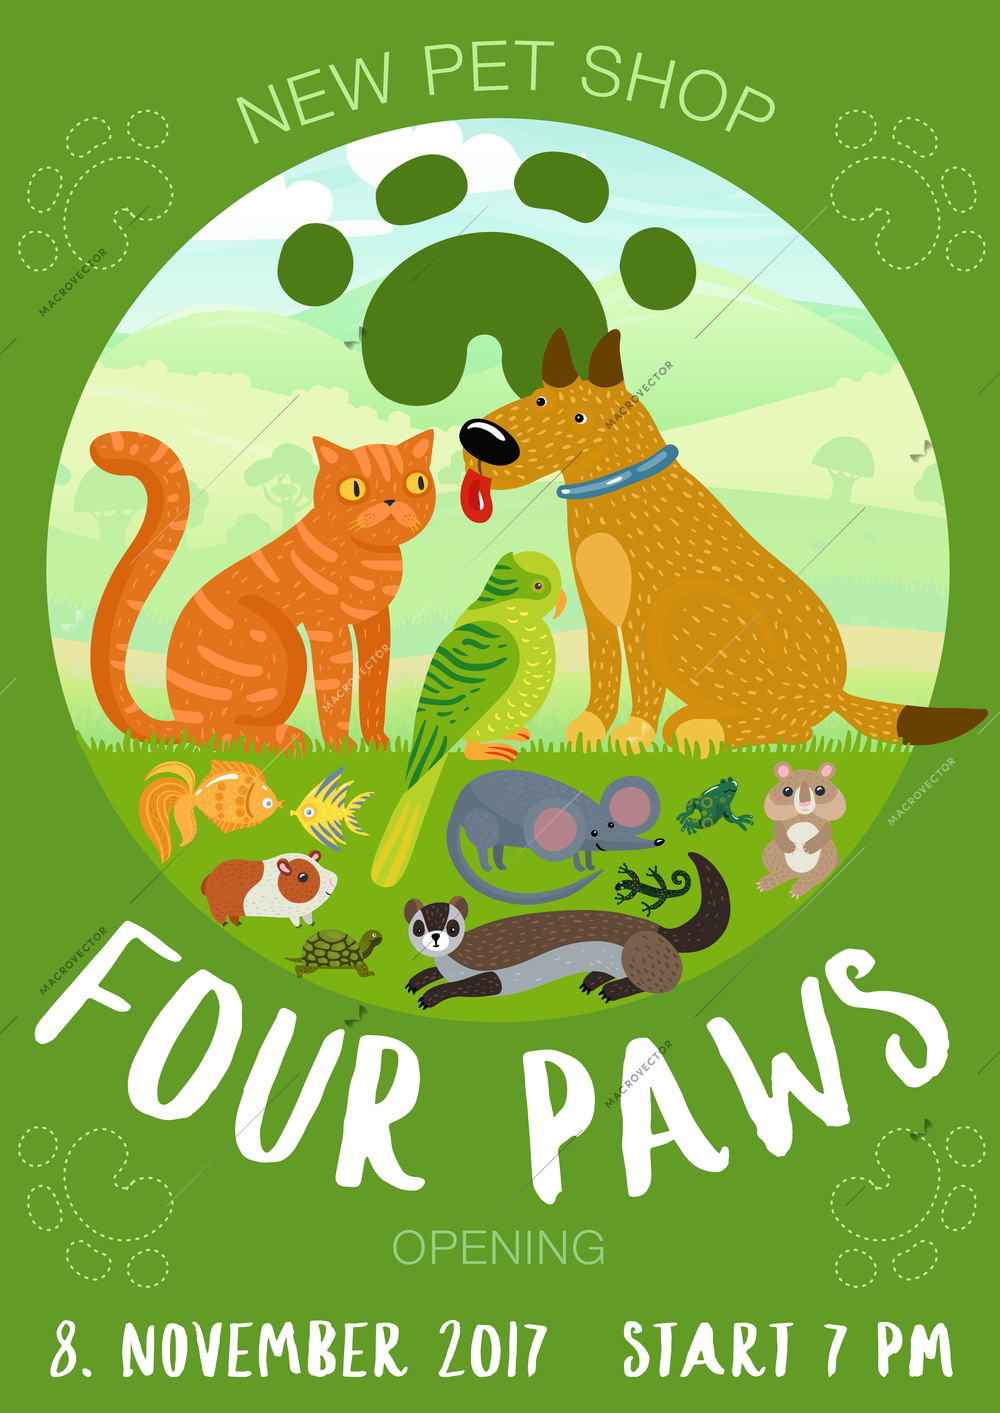 Pet shop advertising poster with paw prints, cat and dog, fishes, rodents on green background vector illustration